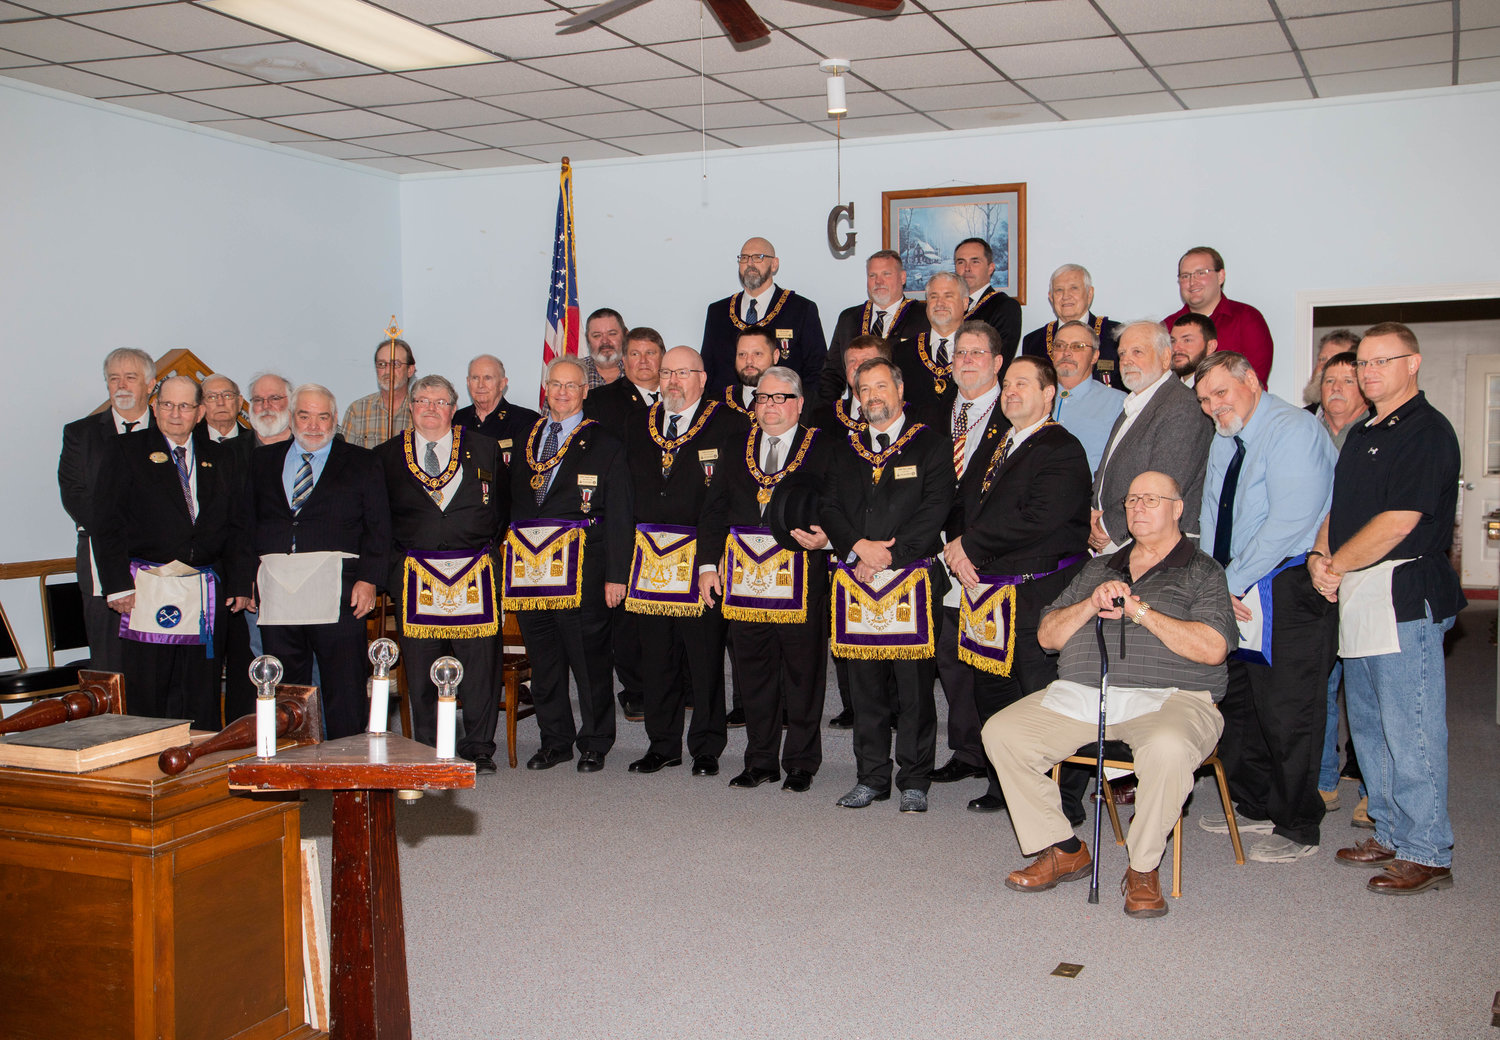 Cairo and Milton Lodges pose for a photo Saturday after the Milton Lodge retires its charter and merges with Cairo.